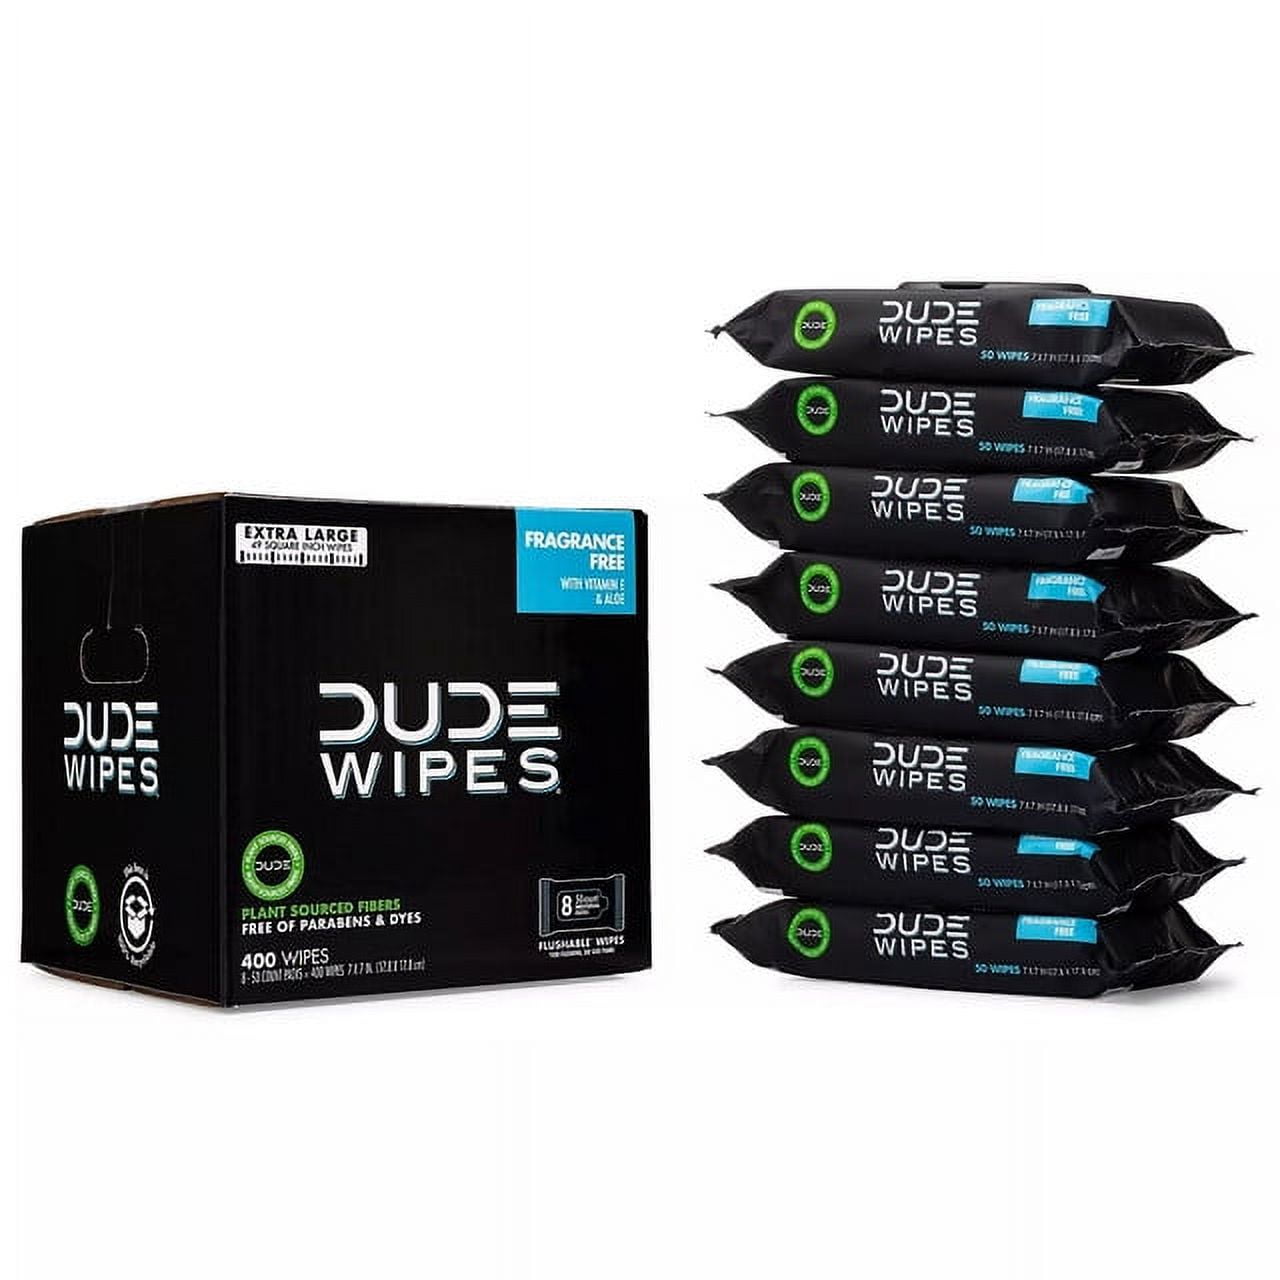 Dude Wipes Flushable Wipes, Fragrance Free, 3 Pack - 3 - 48 wipe packs [144 wipes]